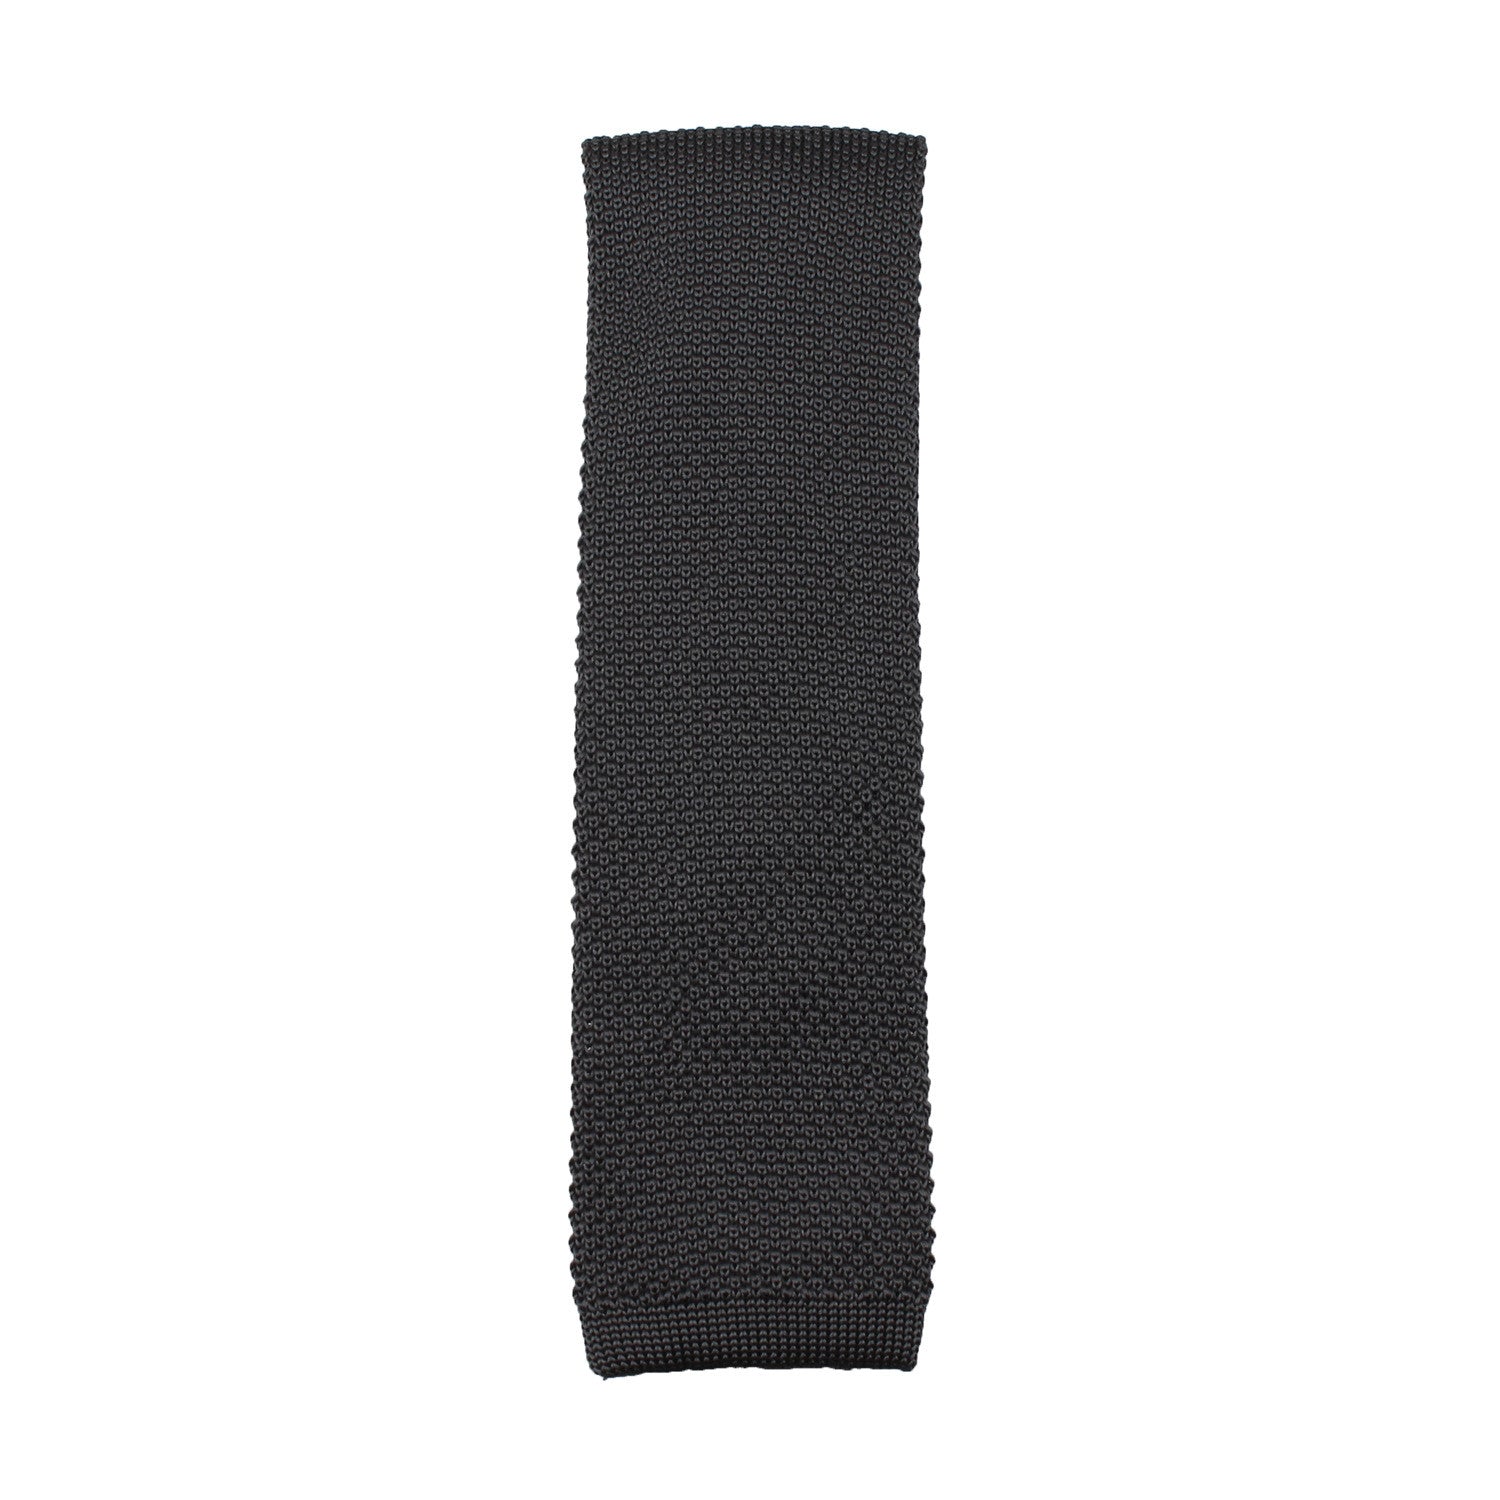 Charcoal Grey Knitted Tie Vertical View